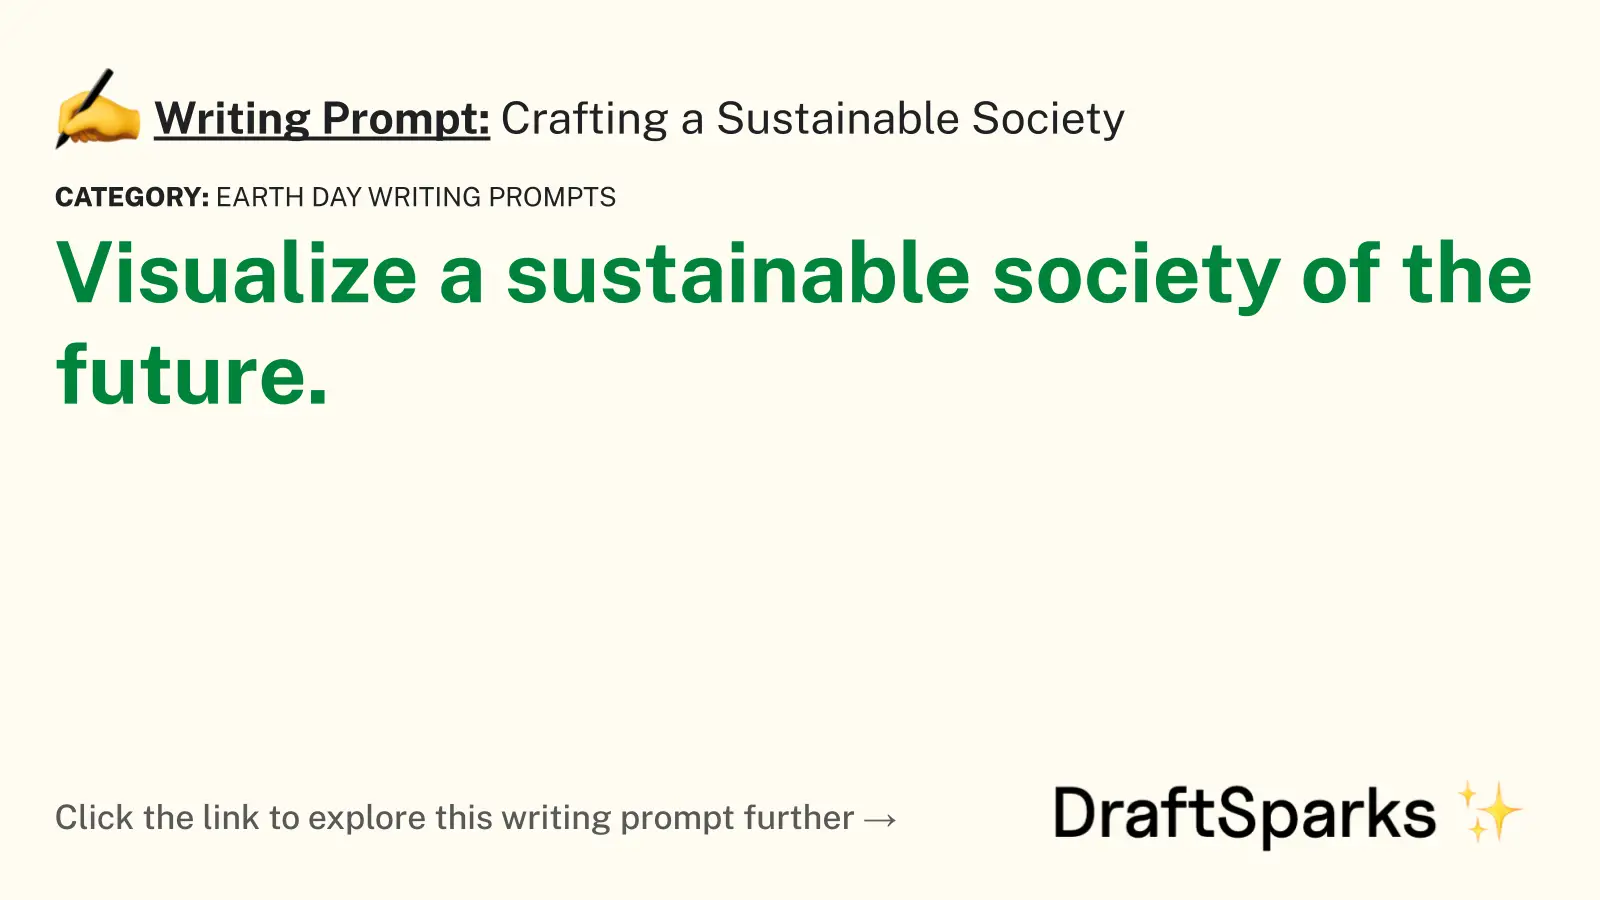 Crafting a Sustainable Society